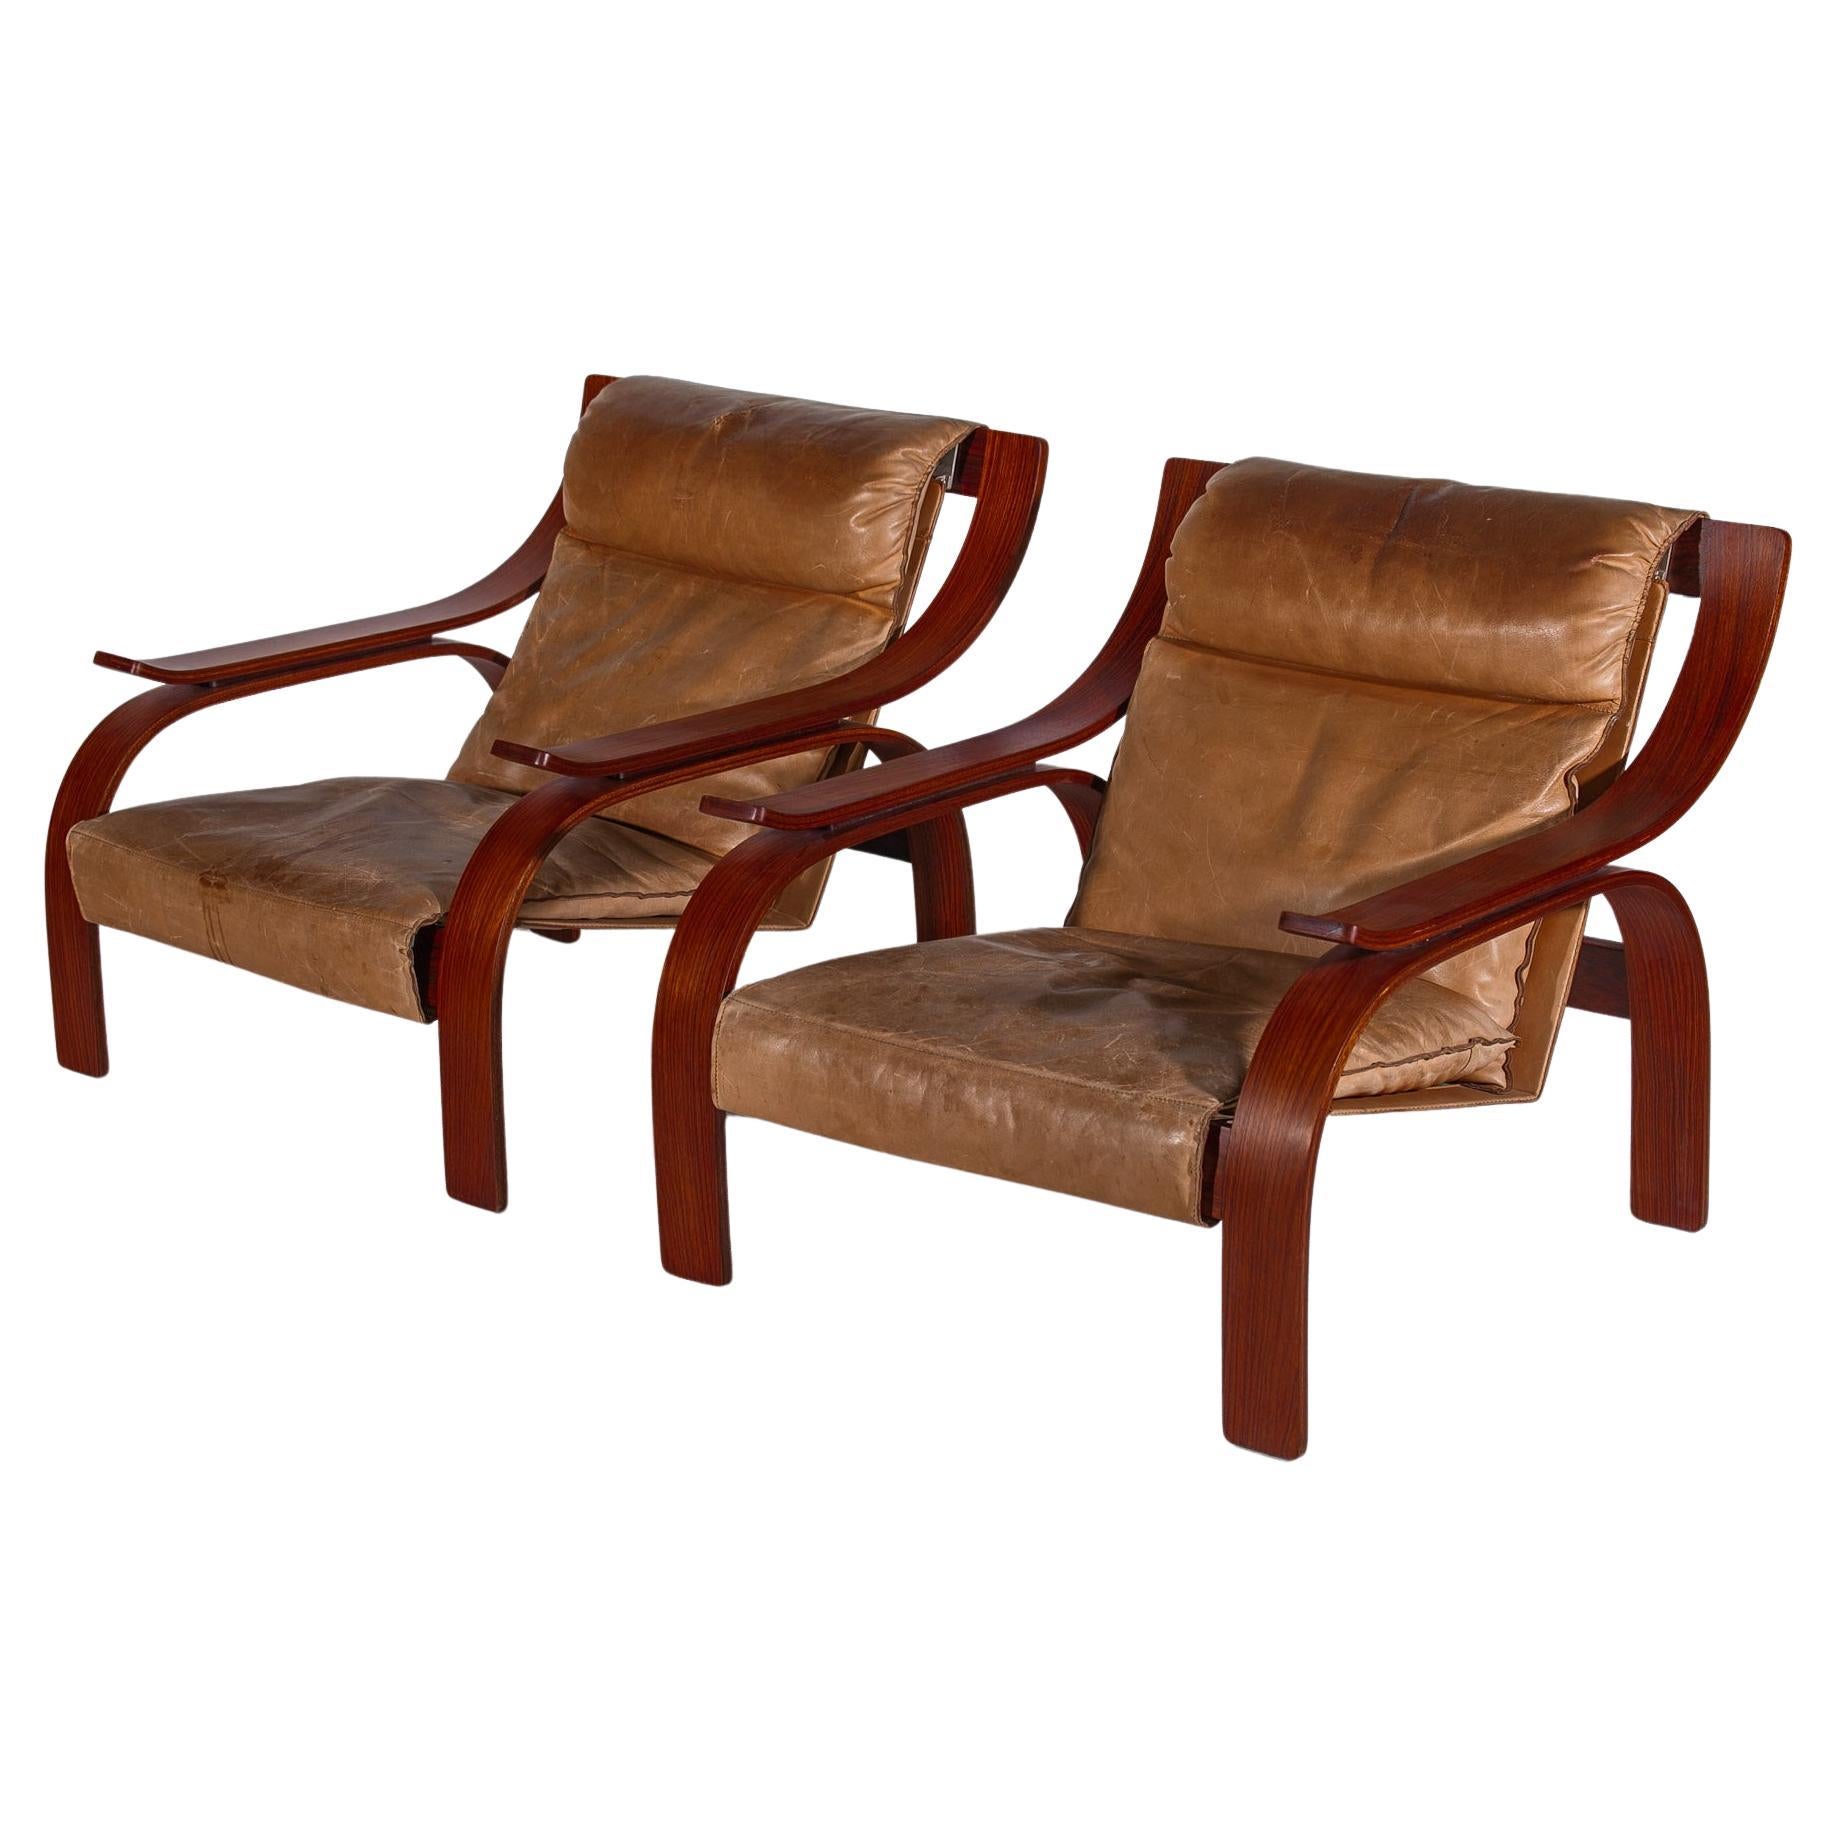 Set of Two Lounge Chairs designed by Marco Zanuso, 1962 Italy, Model 